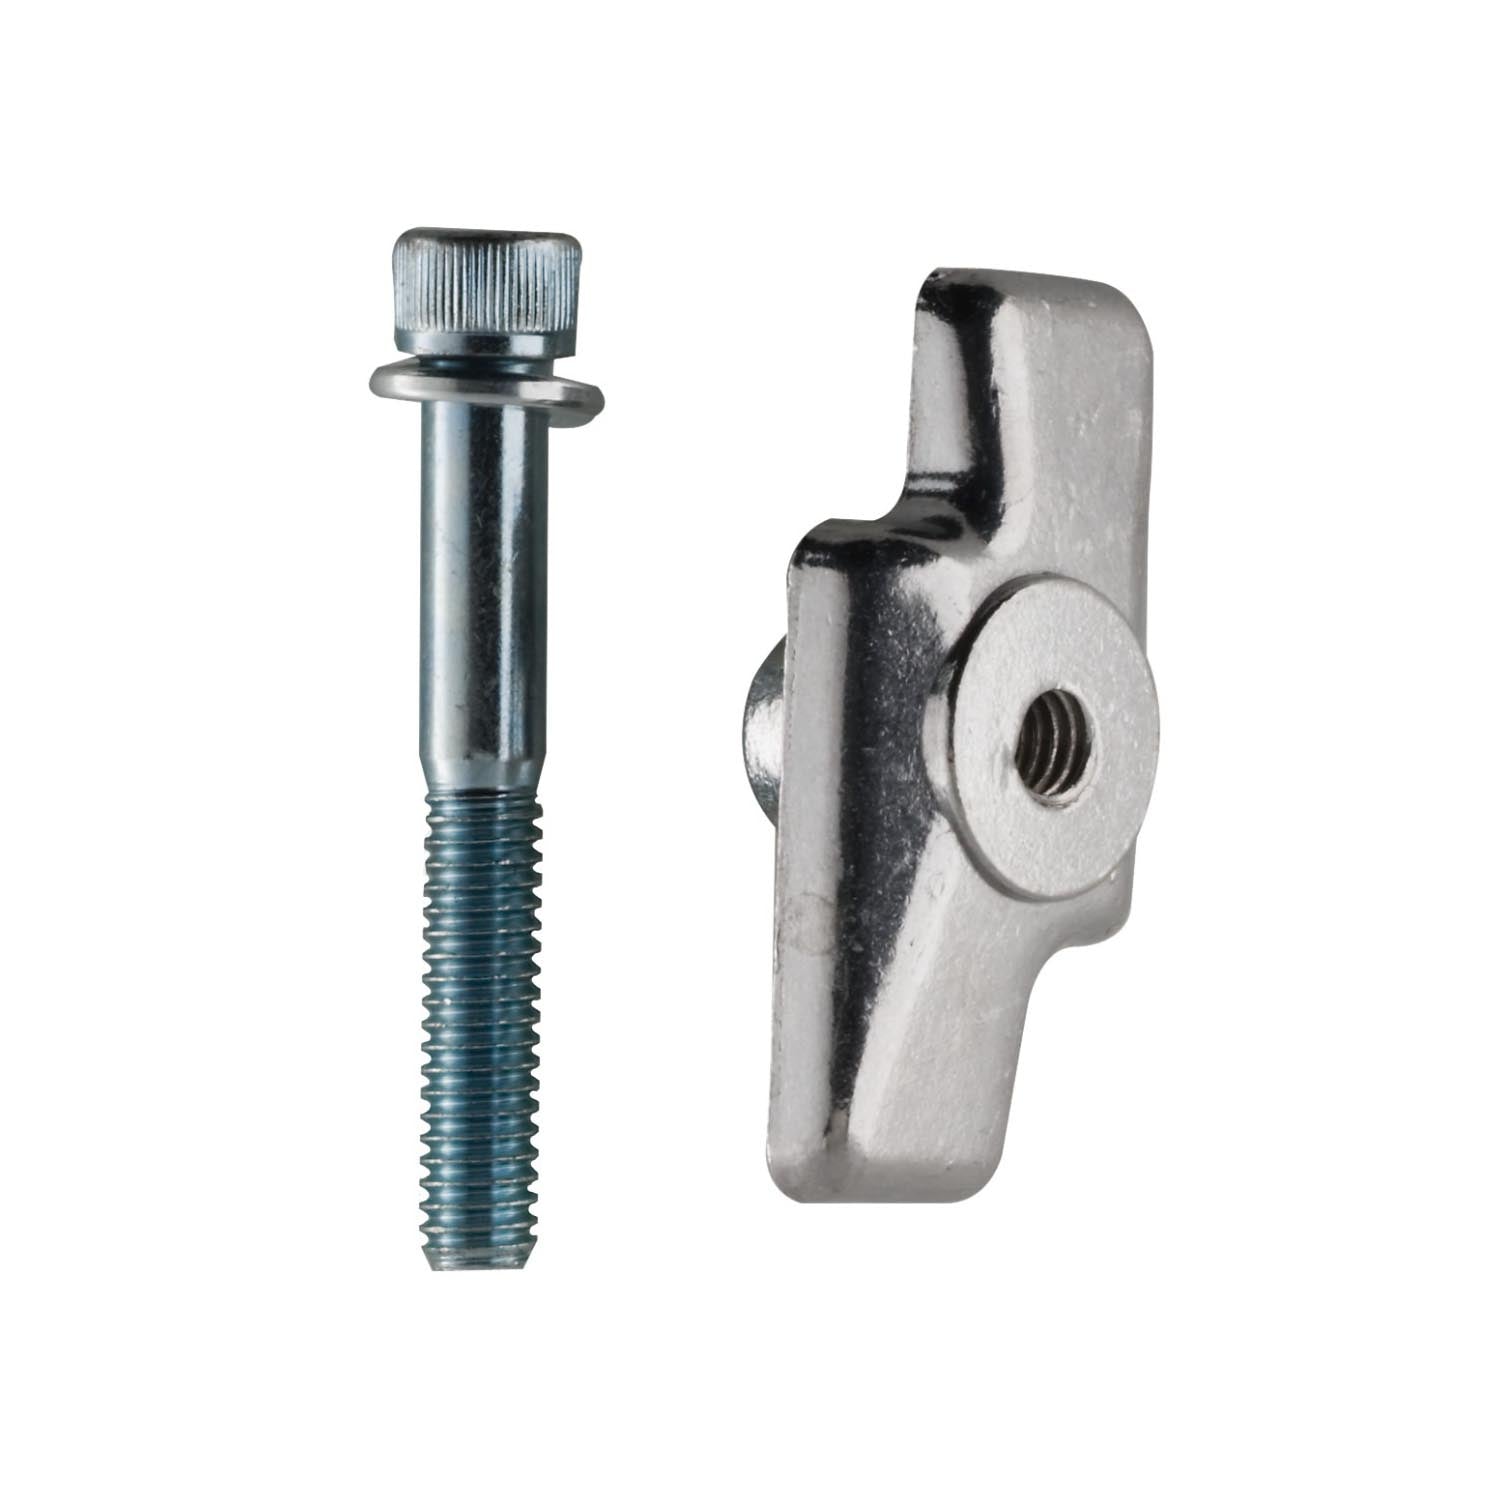 GREENFIELD Kickstand Top Plate, Bolt, and Washer Kit: For Better Clearance with Top swing Derailleurs